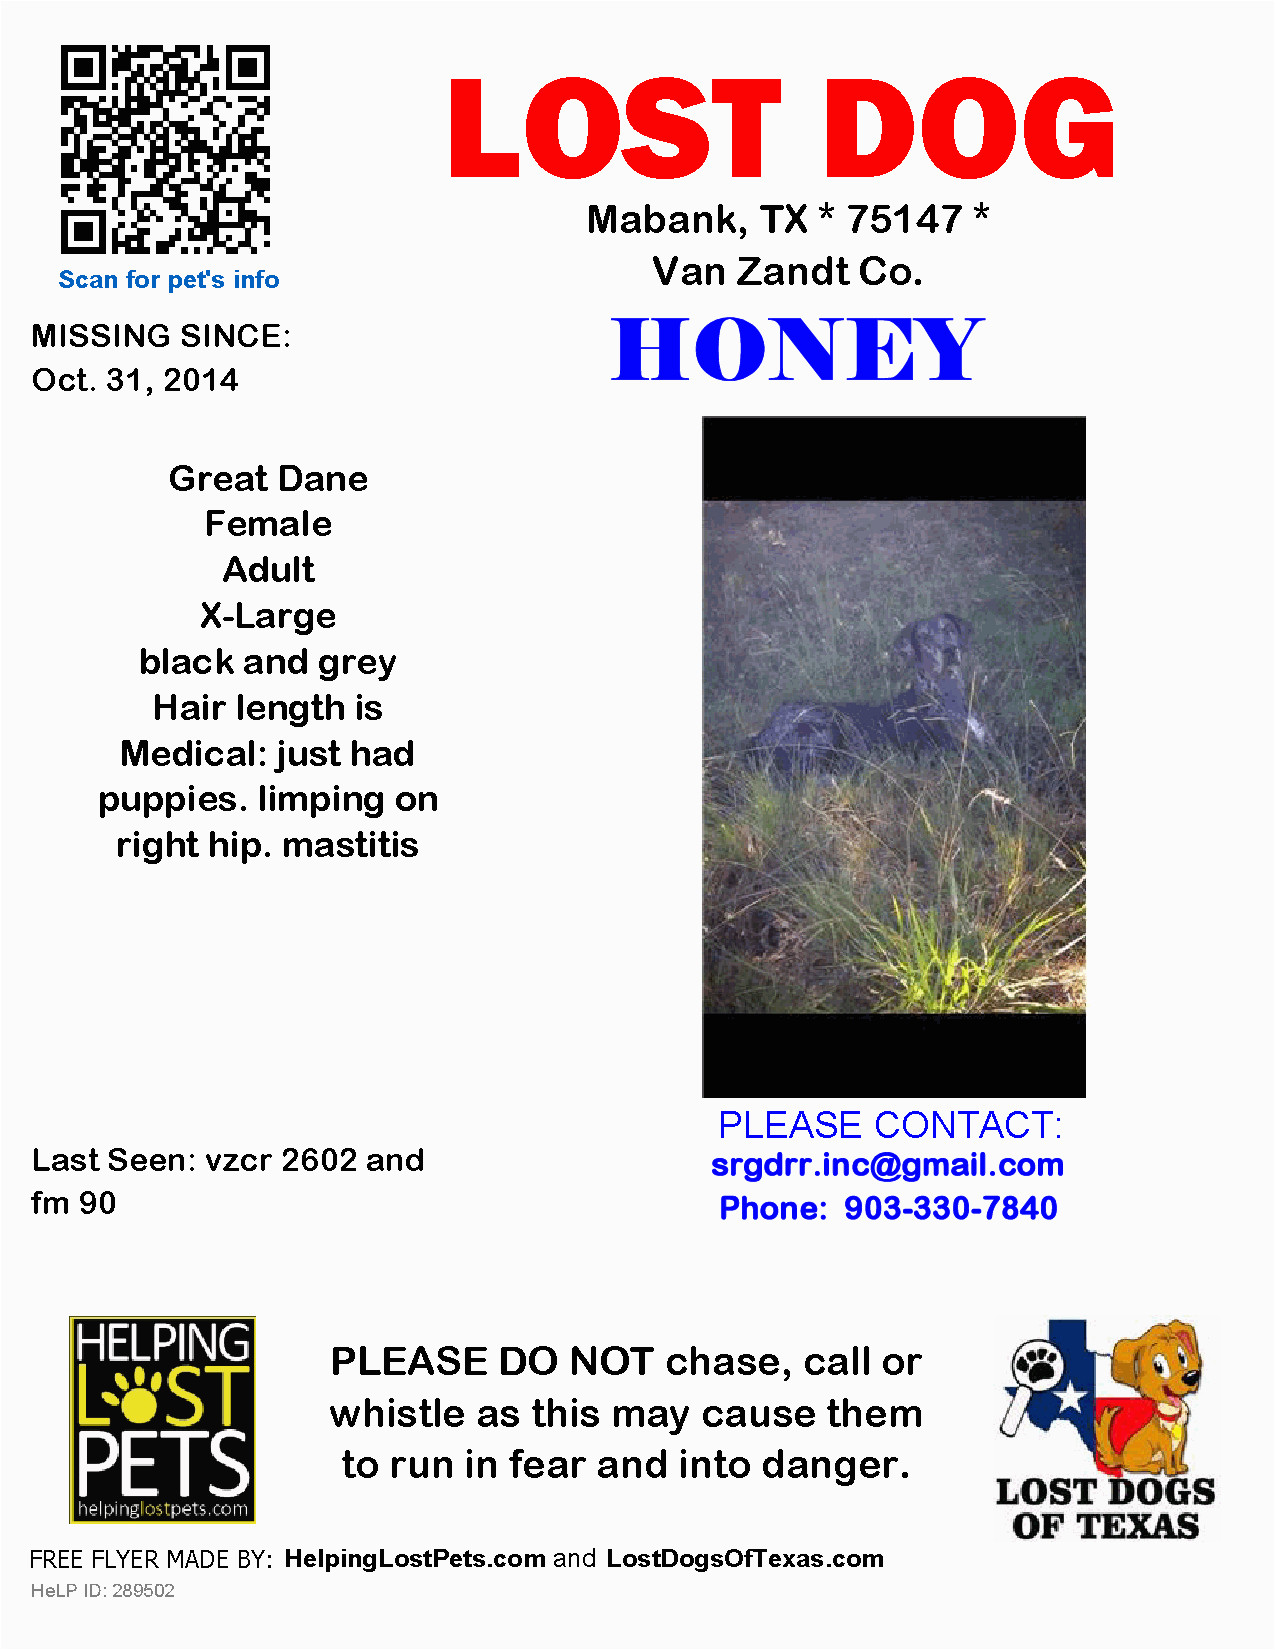 lost dog great dane mabank tx united states save rocky the